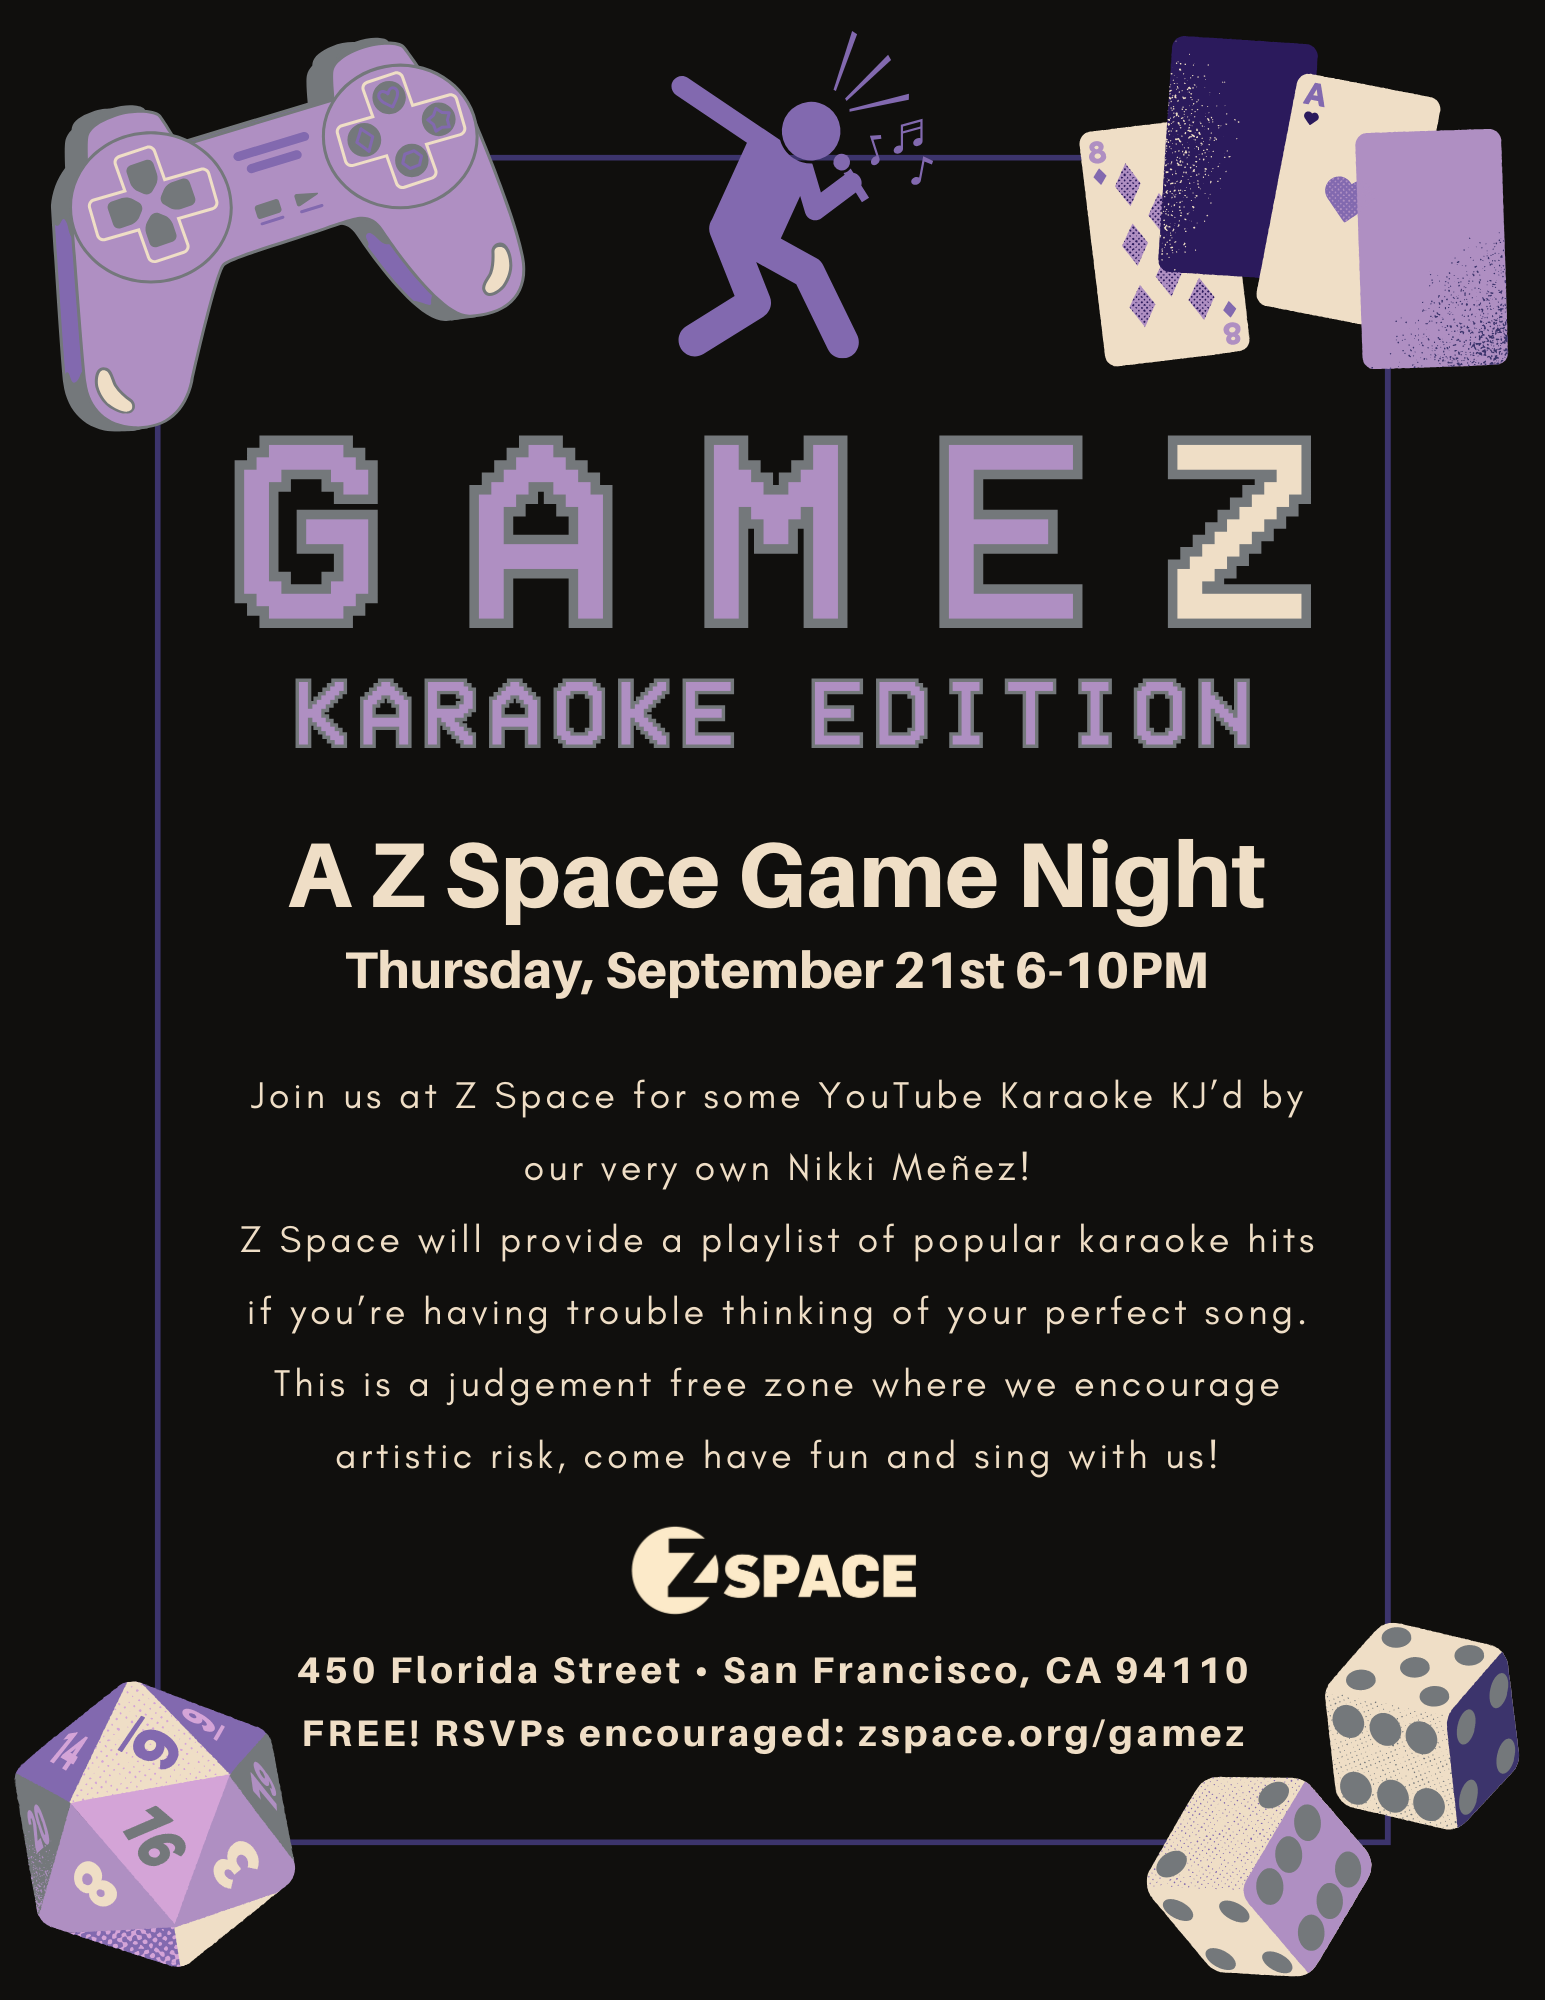 IG+GAMEZ+A+Z+Space+Game+Night+KARAOKE+EDITION+(8.5+×+11+in)+(1).png